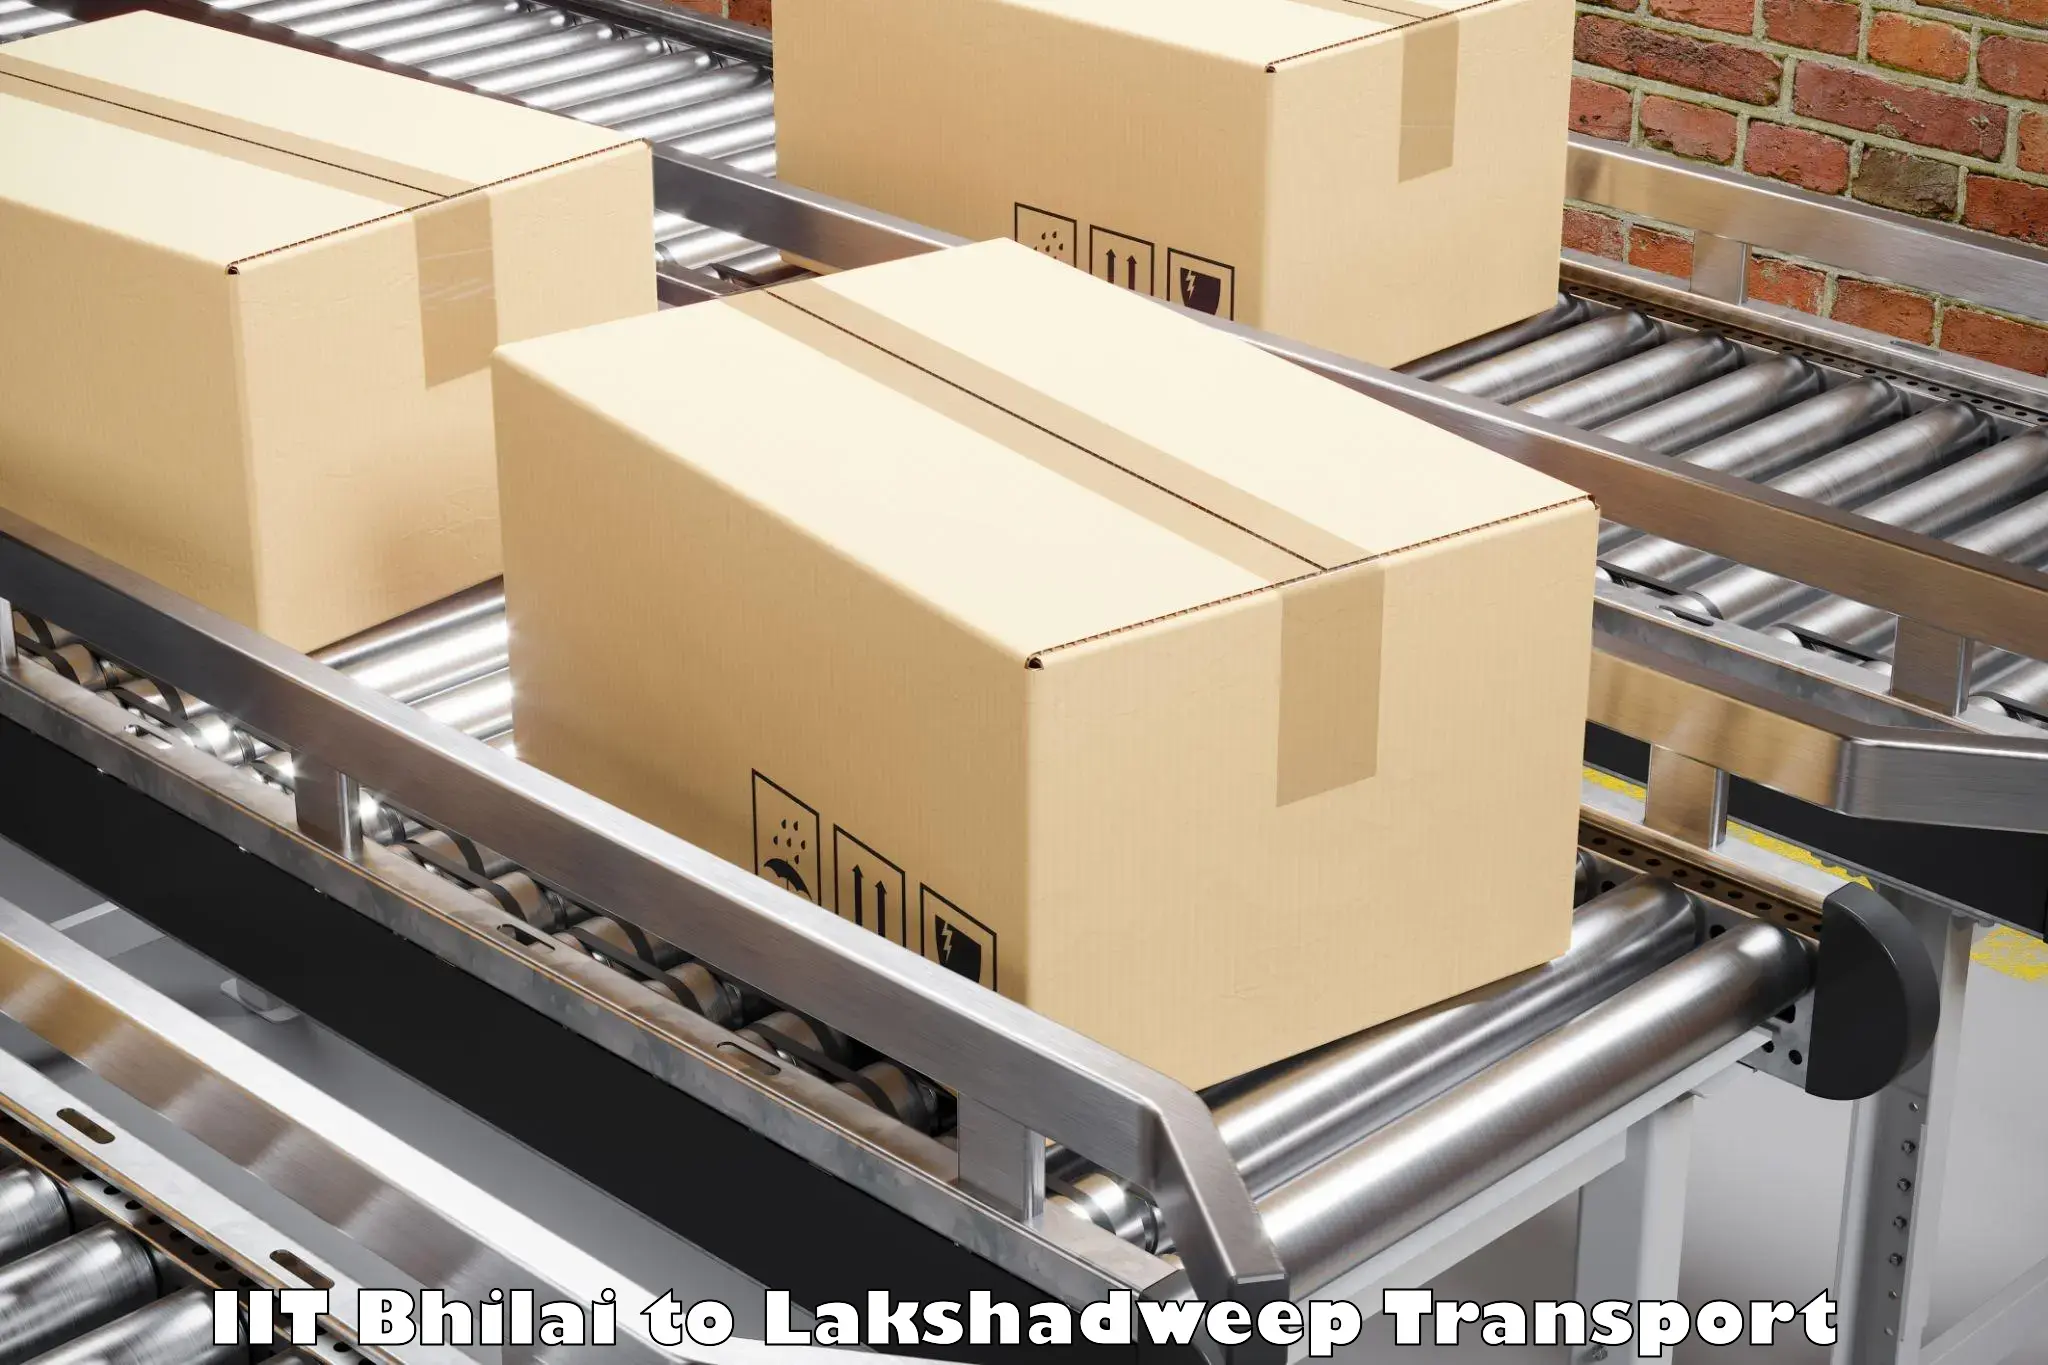 Cargo train transport services in IIT Bhilai to Lakshadweep